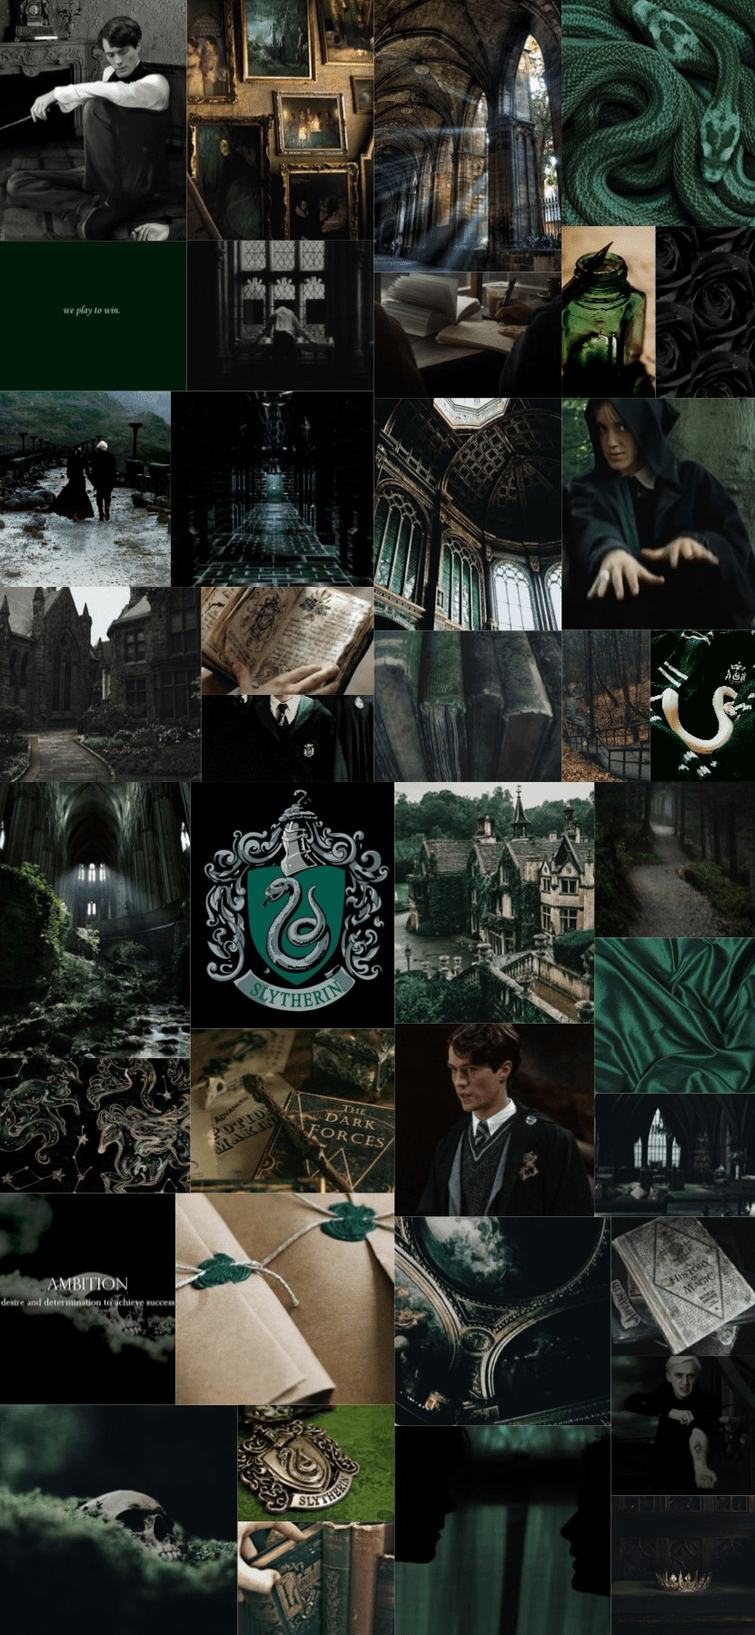 A collage of images related to the Harry Potter series, specifically focusing on the house of Slytherin. - Slytherin